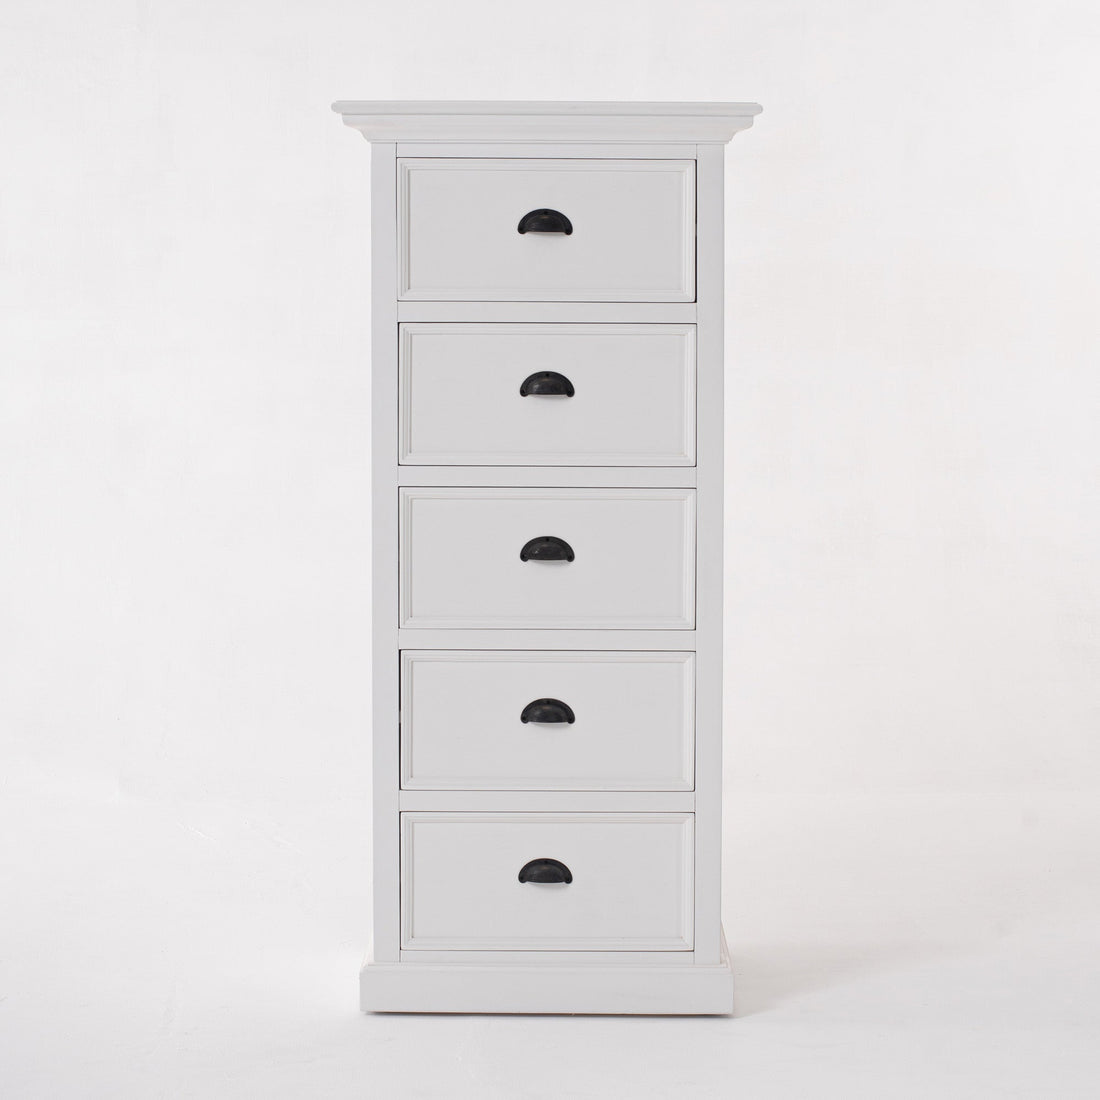 Halifax Grand Small dresser with drawers